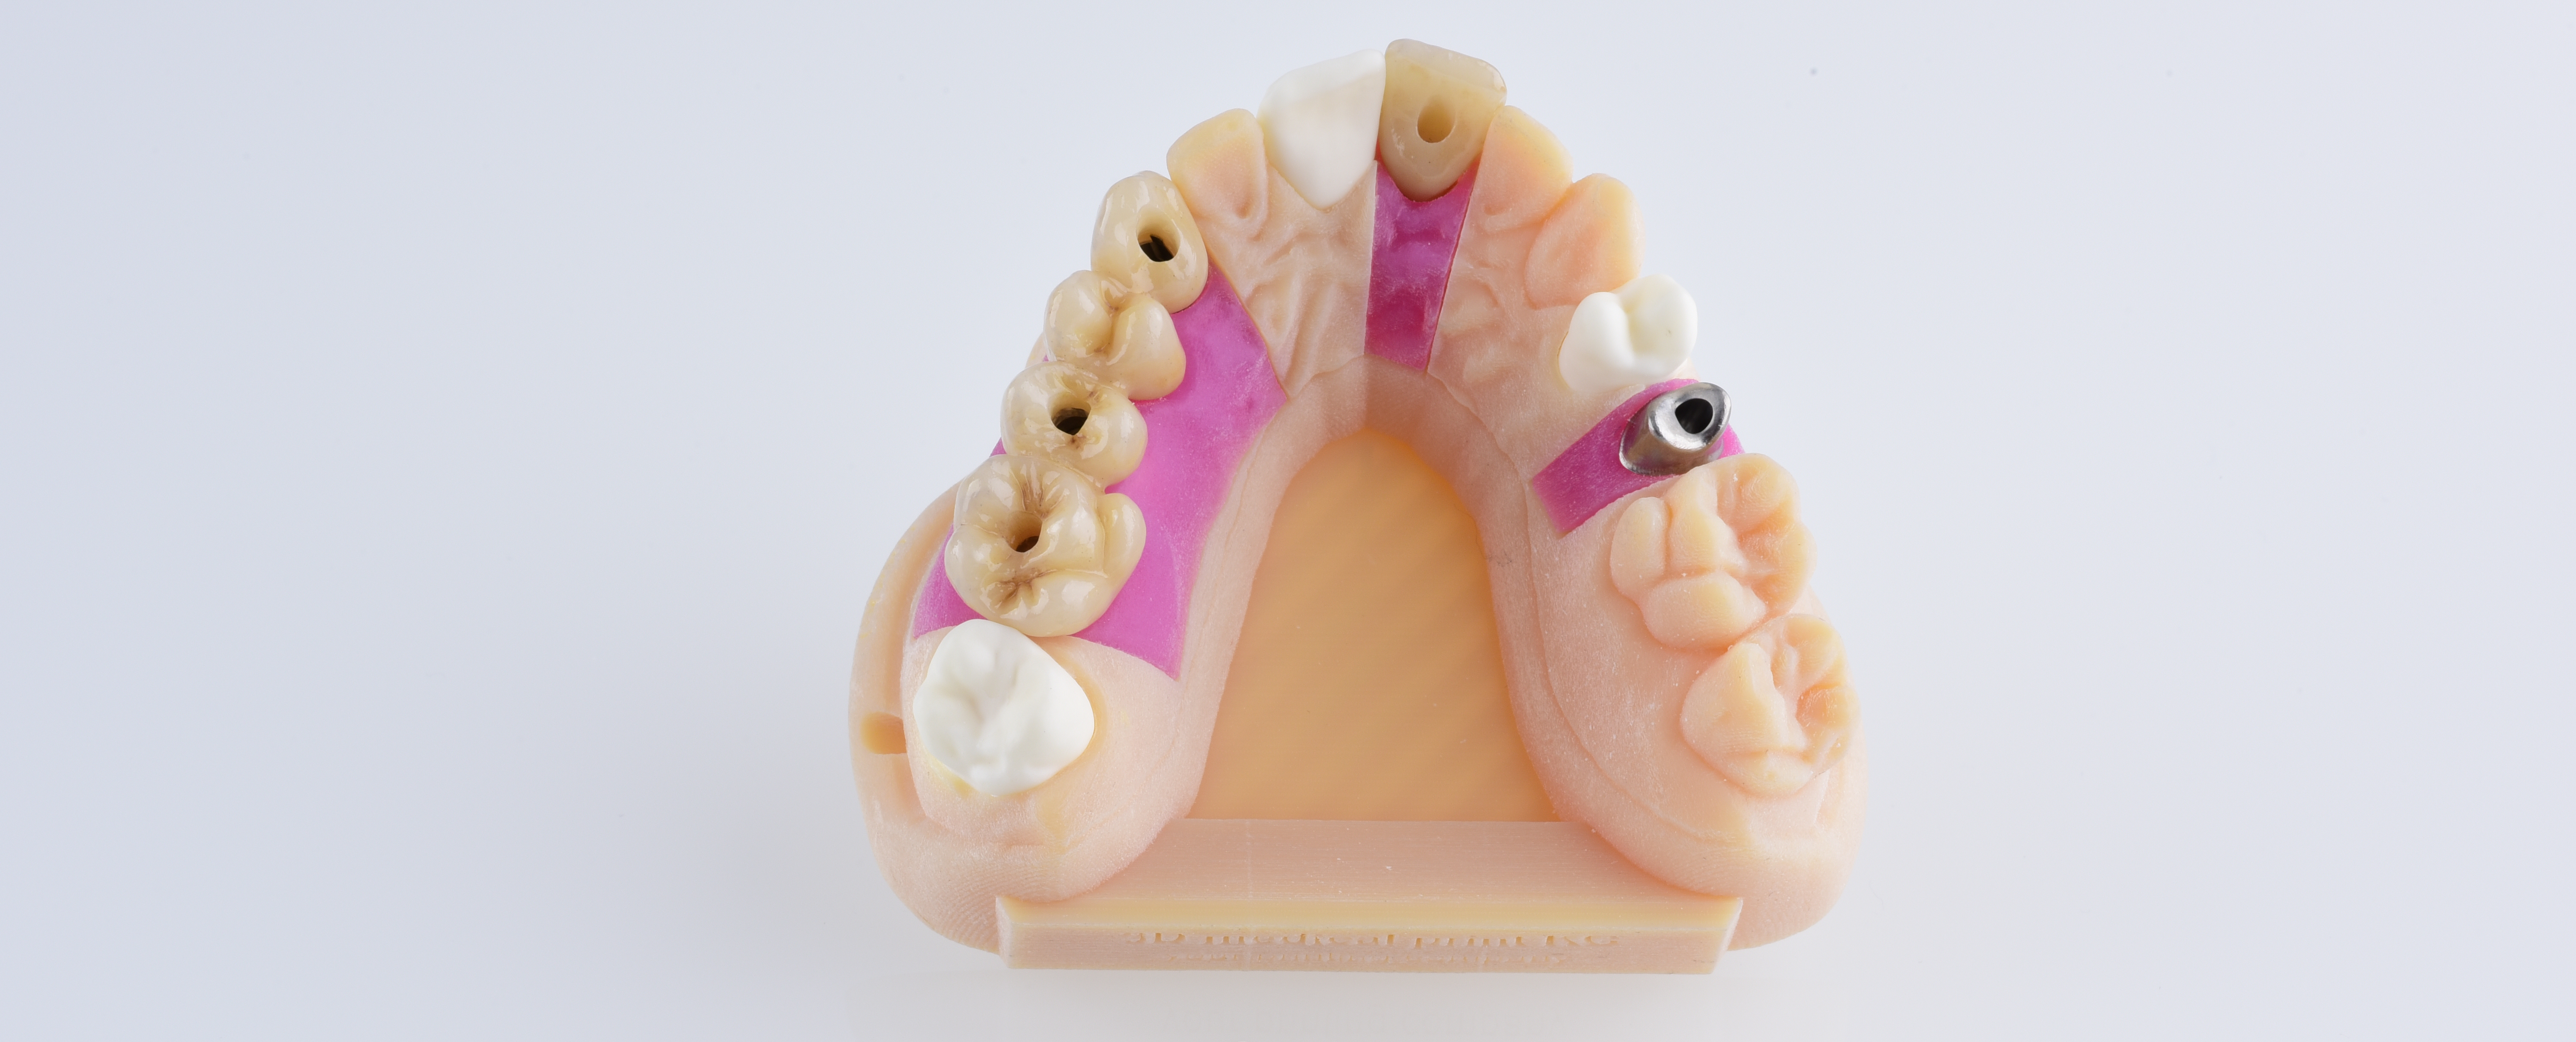 Great benefits of using 3D-printing and digital models in the dental  industry - Elos Medtech